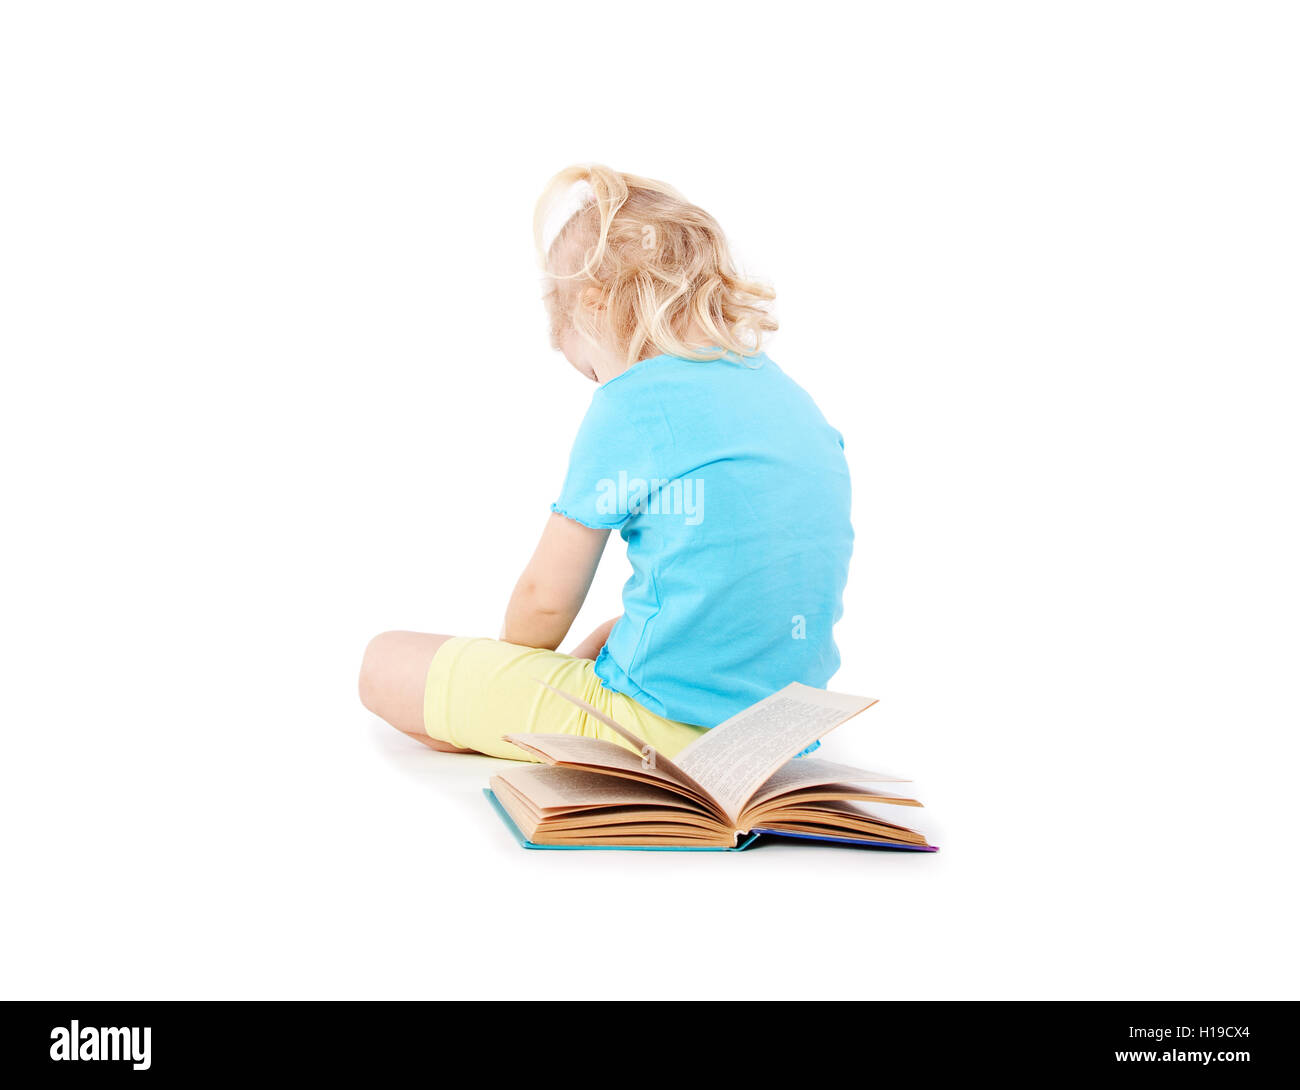 young girl refuse to read the book Stock Photo